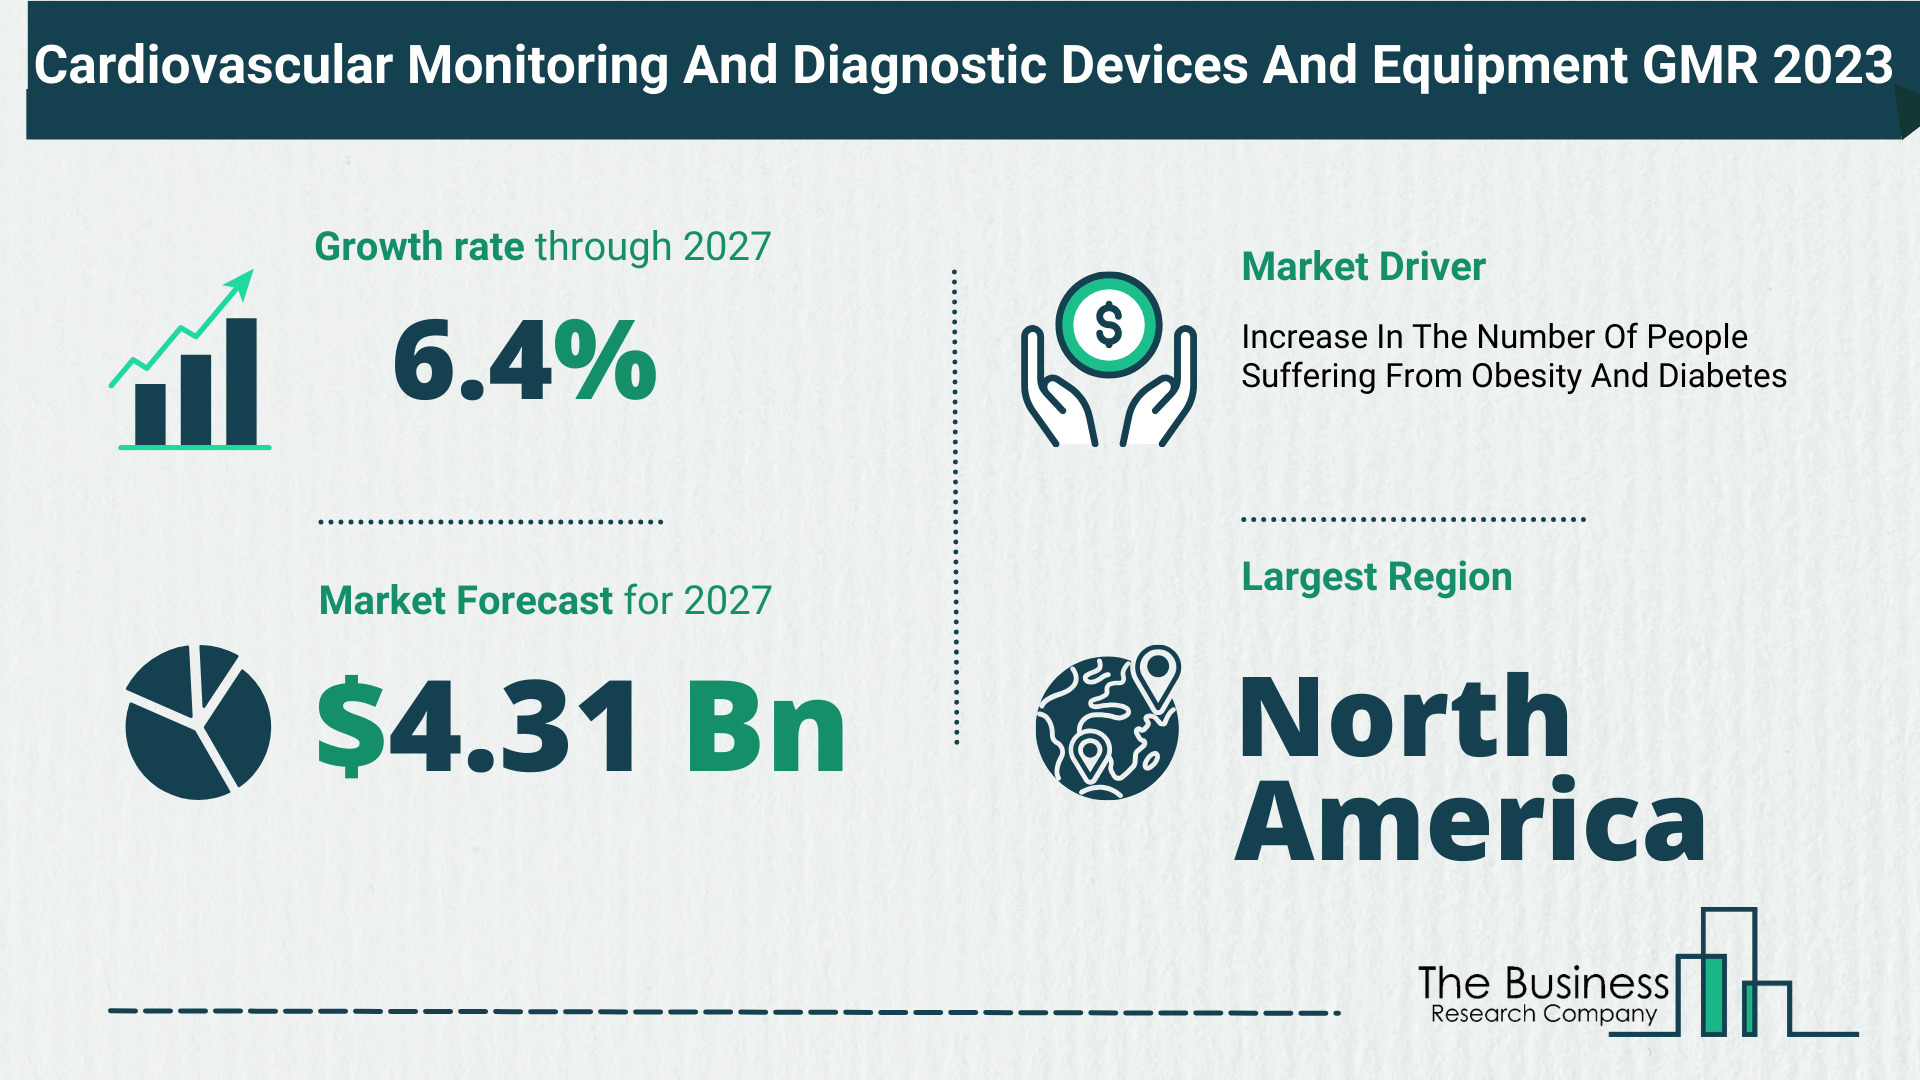 Global Cardiovascular Monitoring And Diagnostic Devices And Equipment Market Size